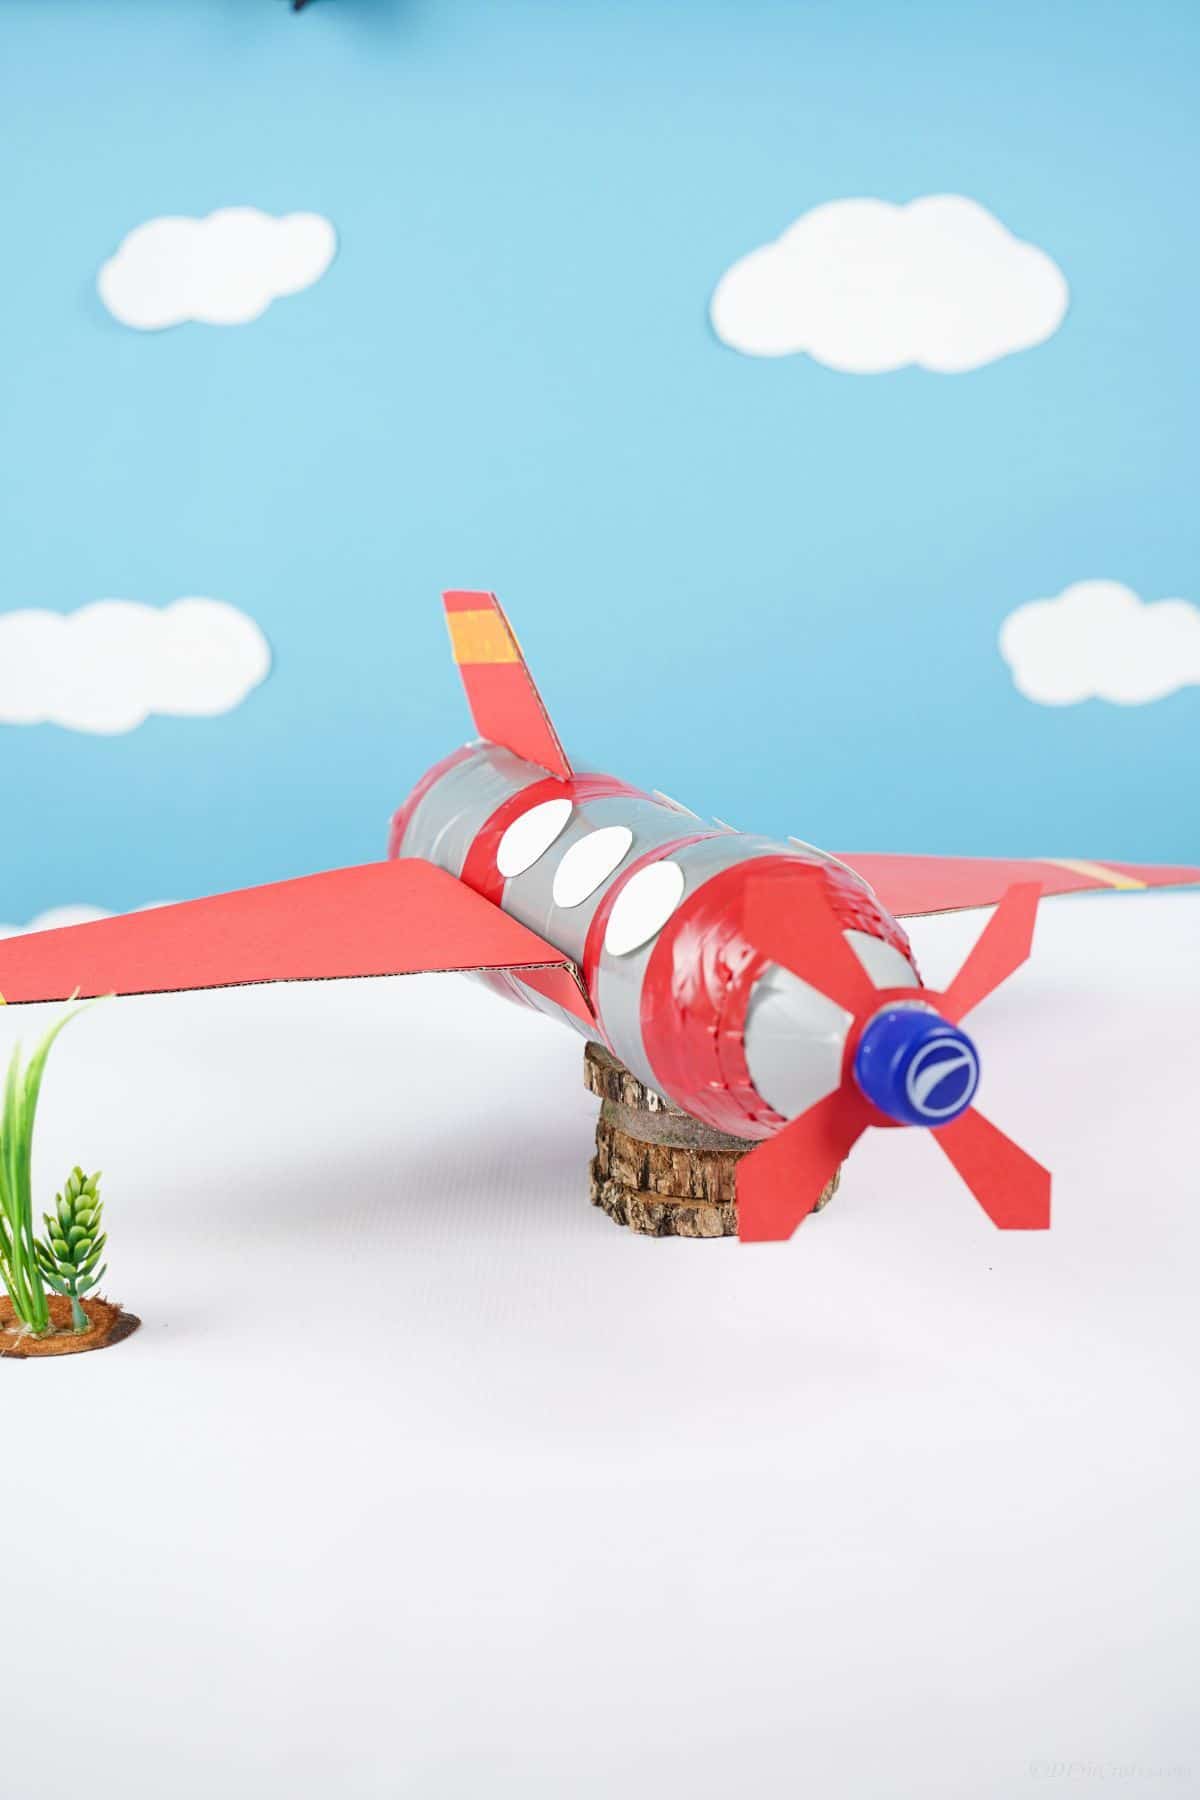 blue background with white clouds behind plastic bottle airplane toy